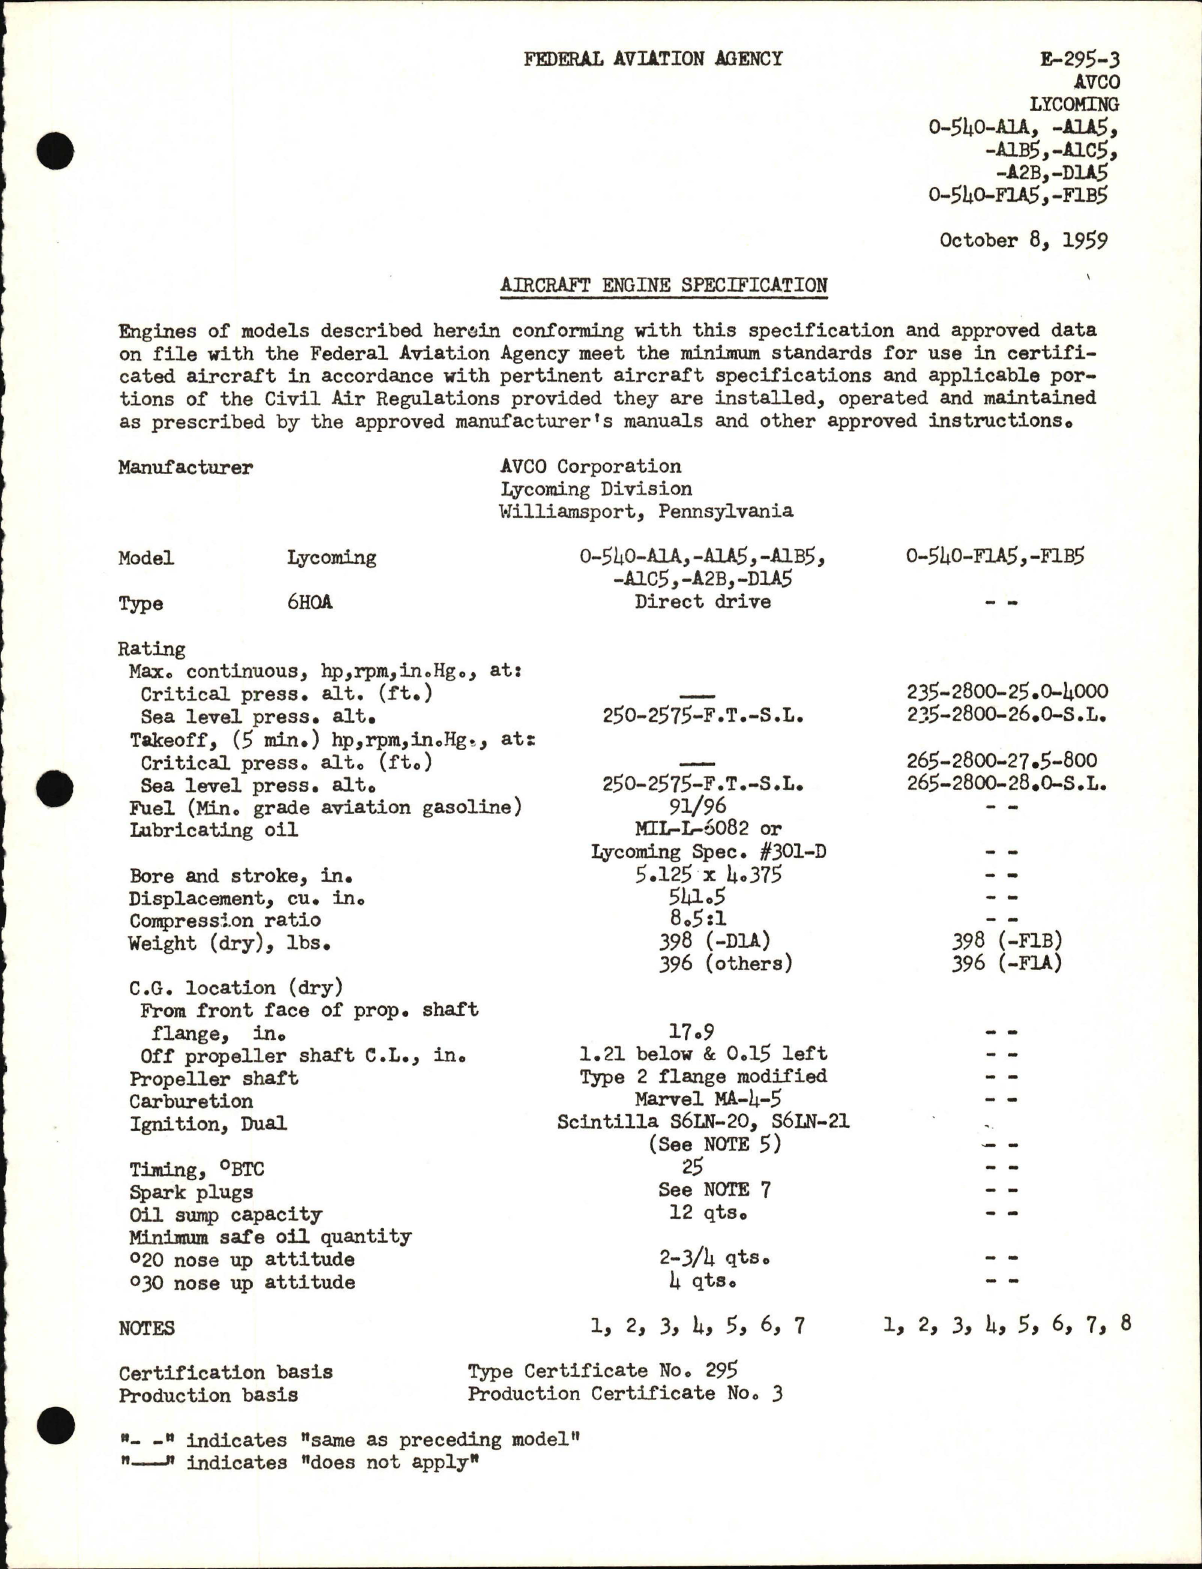 Sample page 1 from AirCorps Library document: O-540